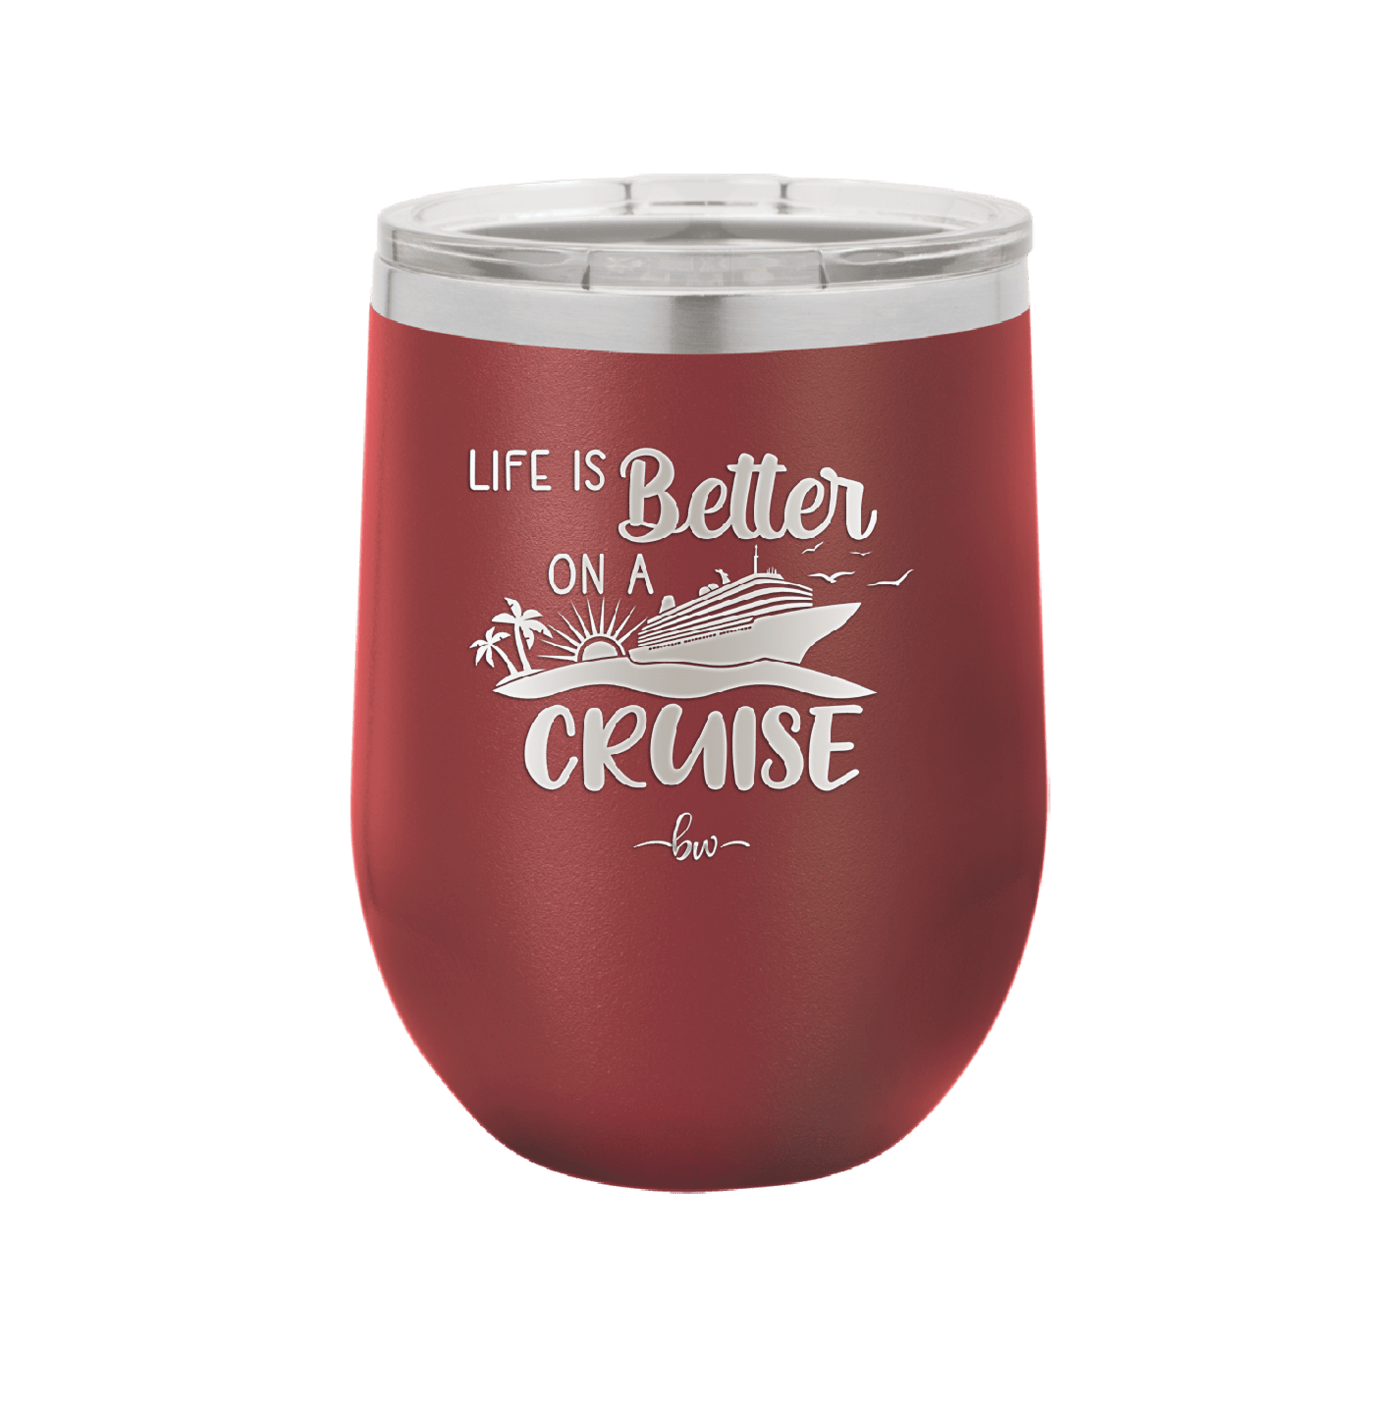 Life is Better on a Cruise 2 - Laser Engraved Stainless Steel Drinkware - 1429 -